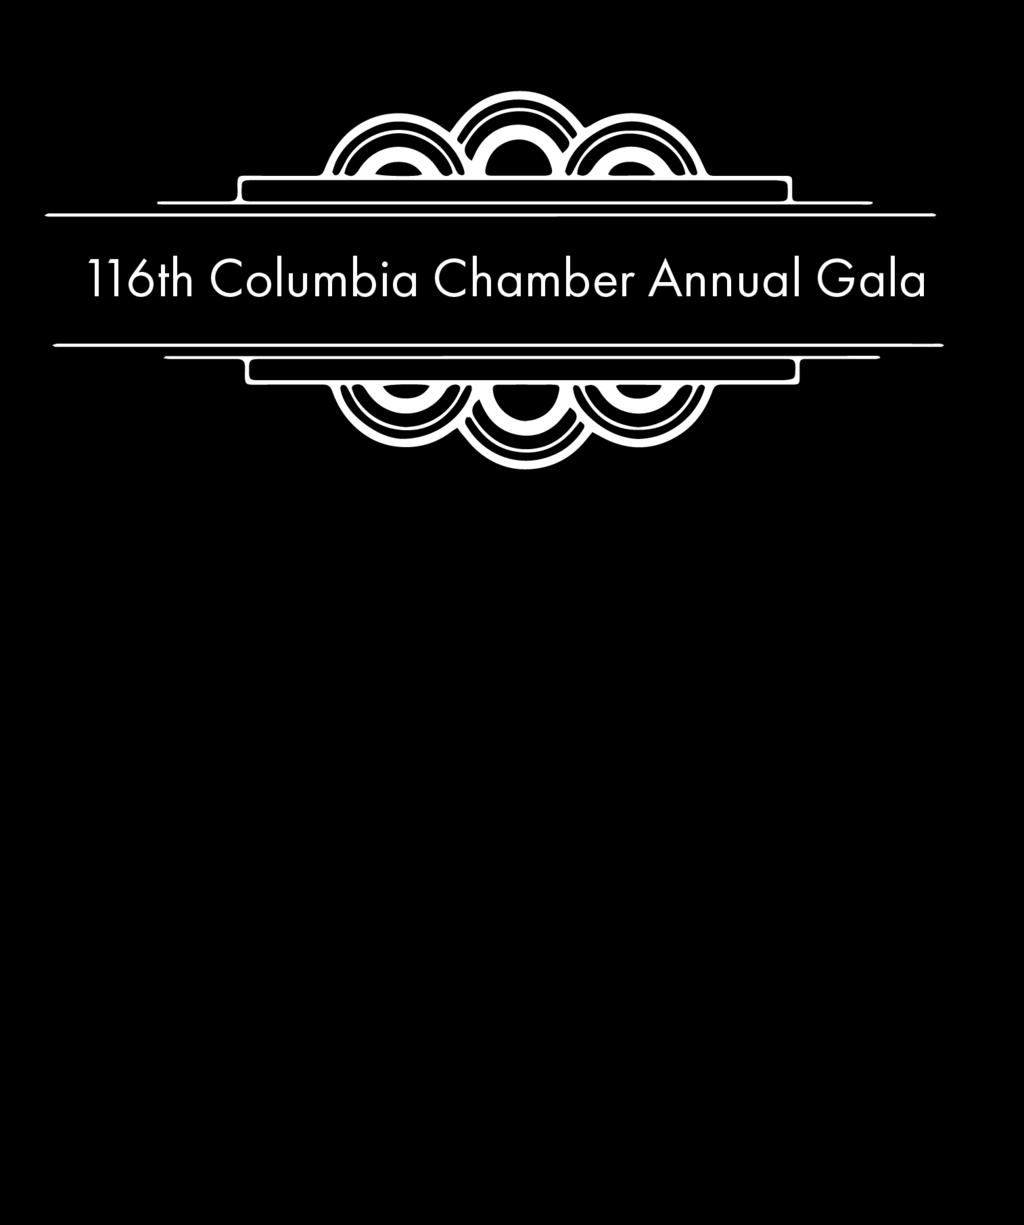 Supporter - $500 *First Right of Refusals for the 117th Gala are due by January 1, 2019 and are subject to price changes.